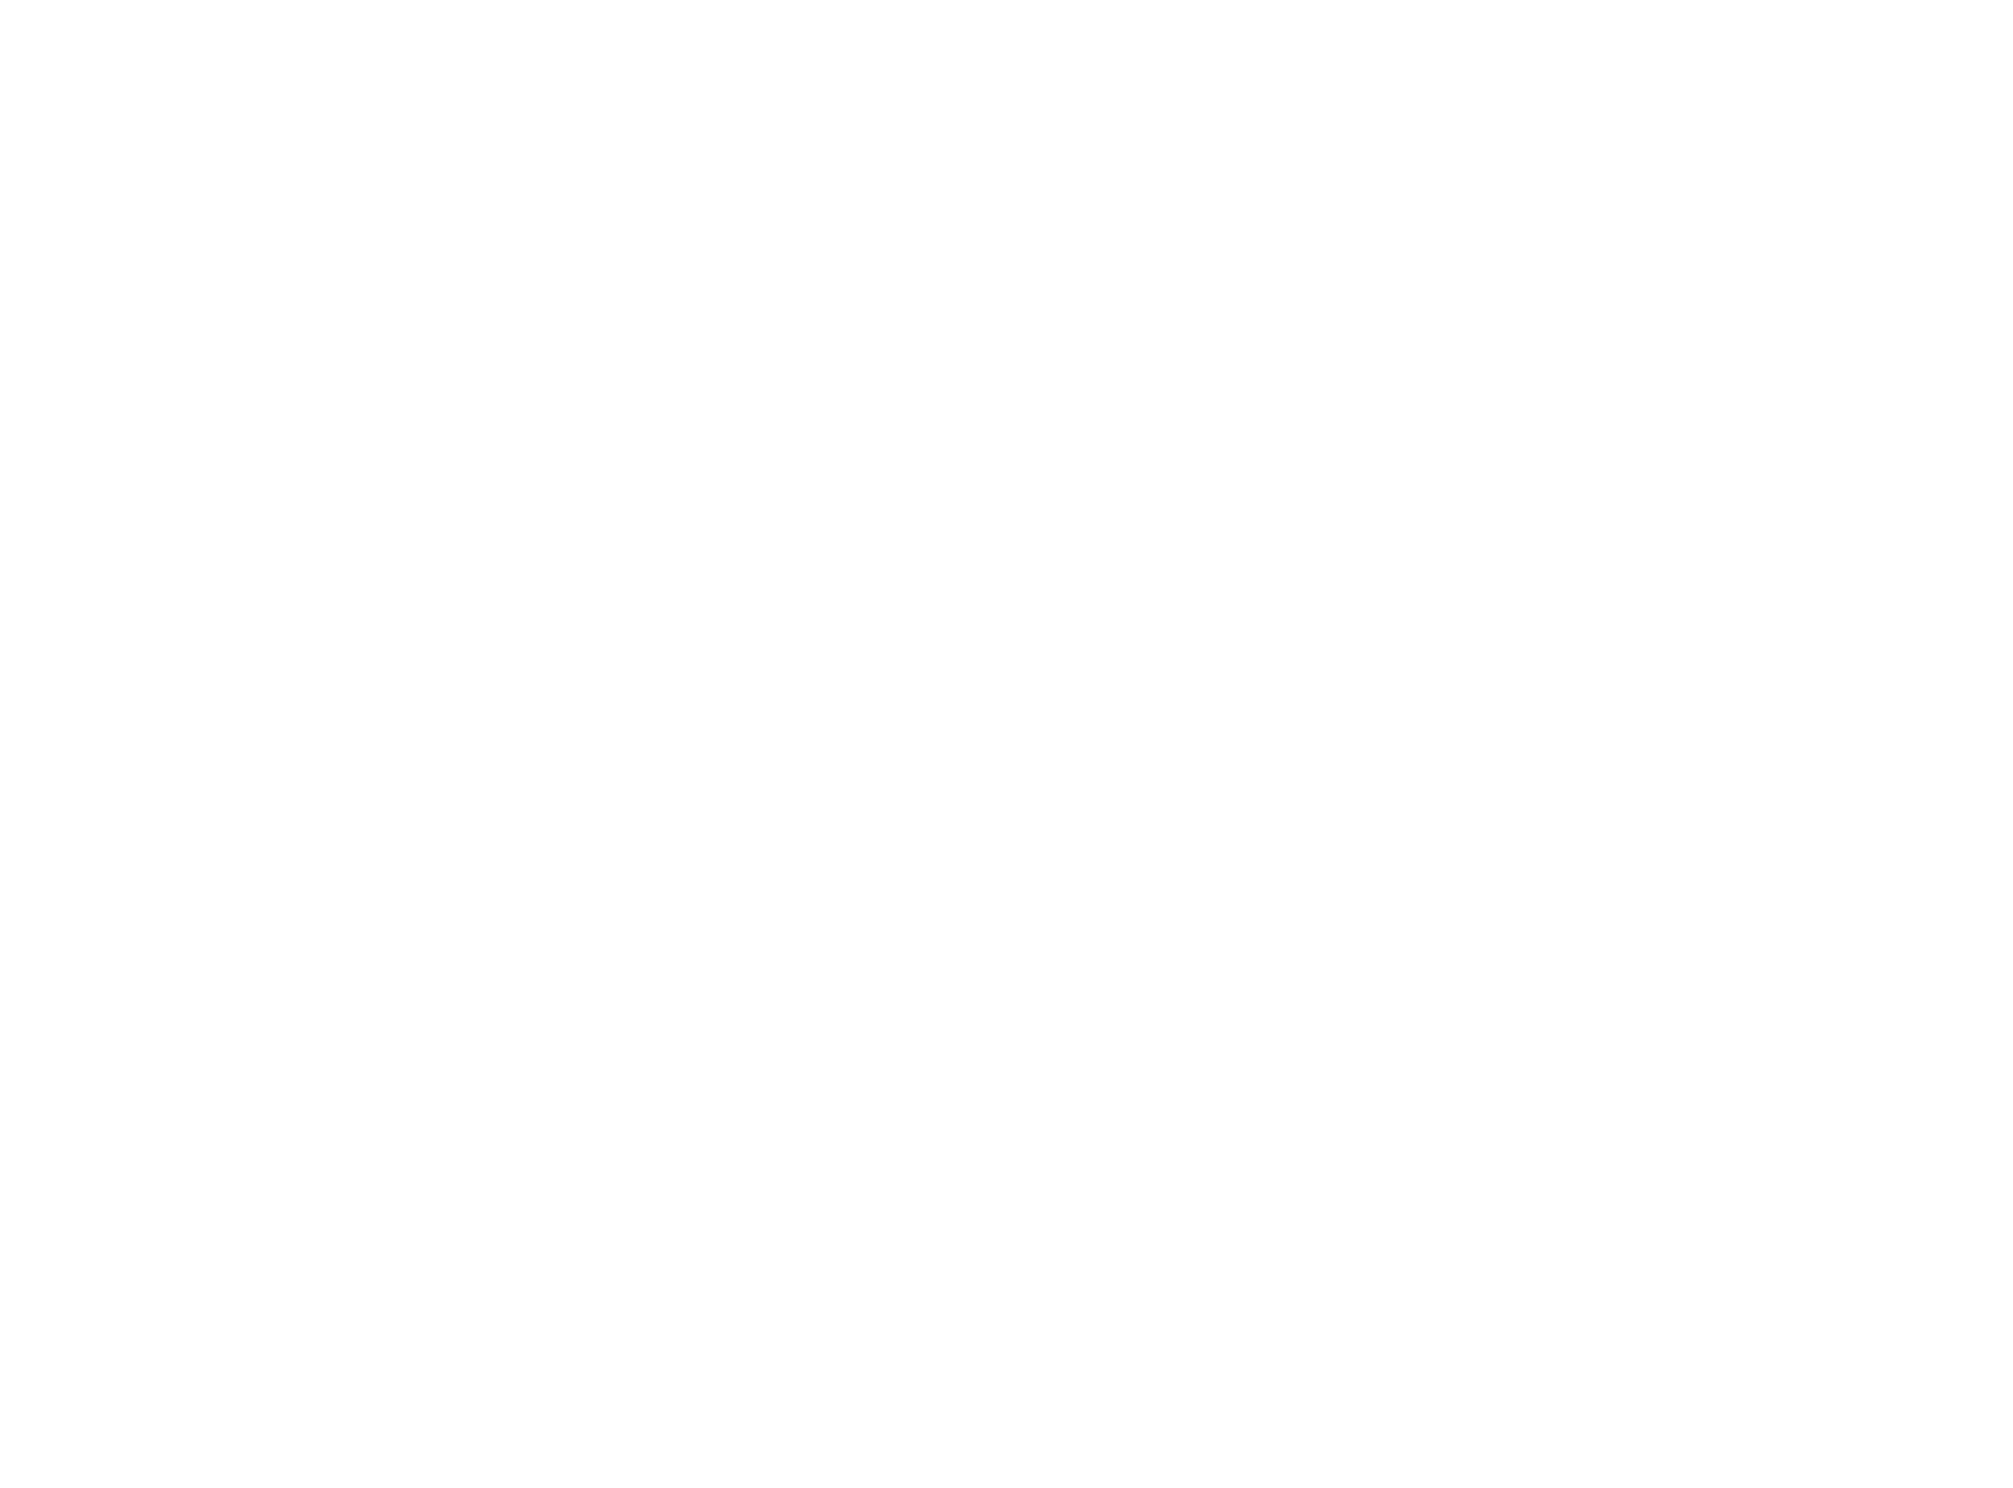 The Thought Factory